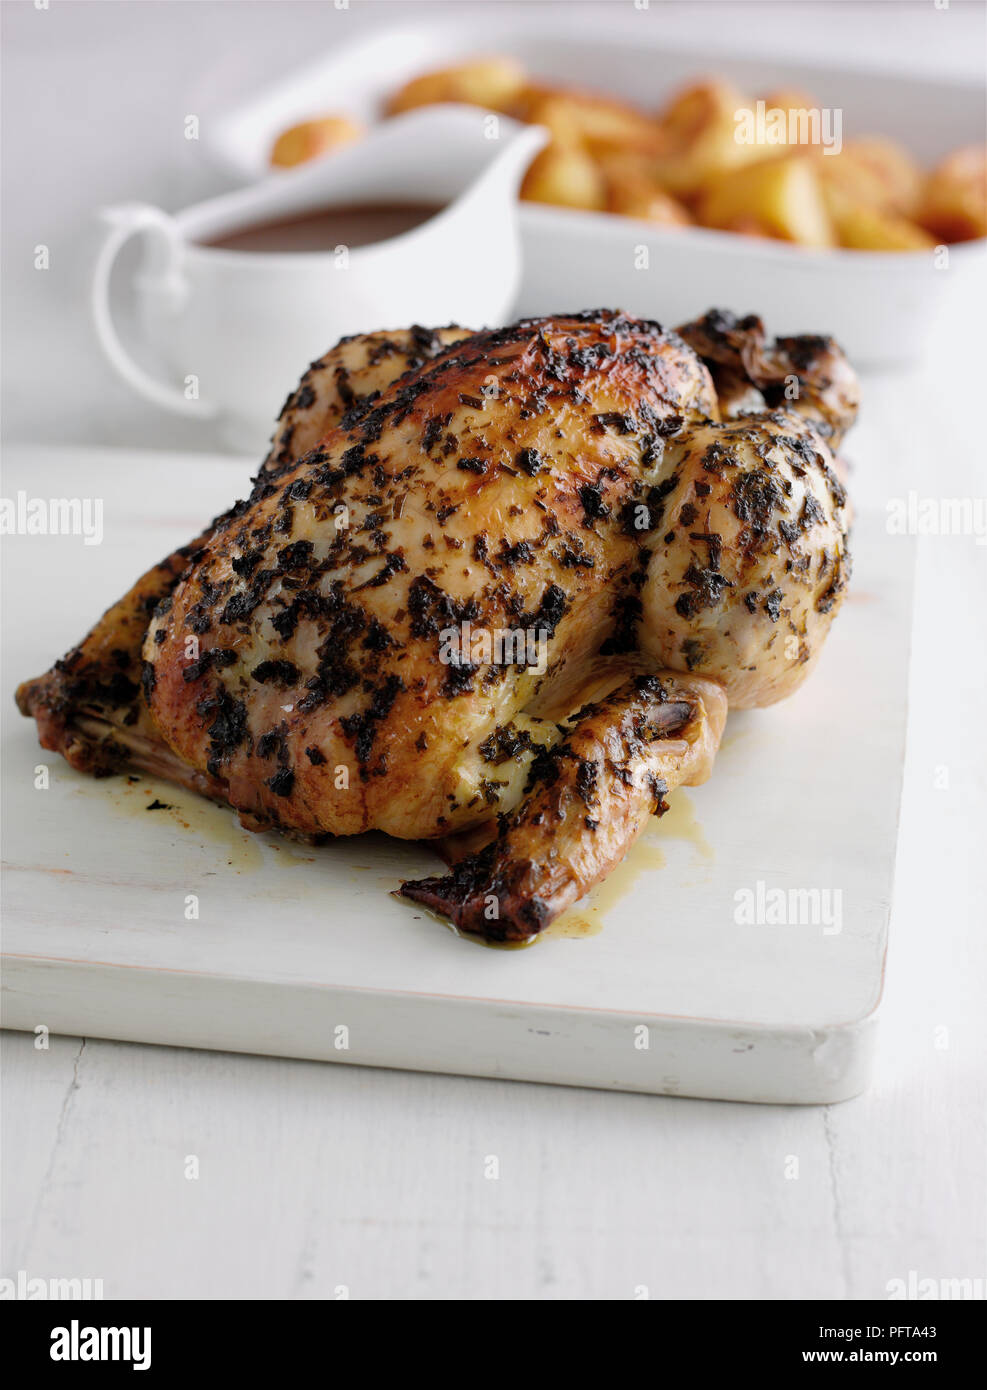 Roast chicken basted in herb butter, gravy boat and roast potatoes in background Stock Photo